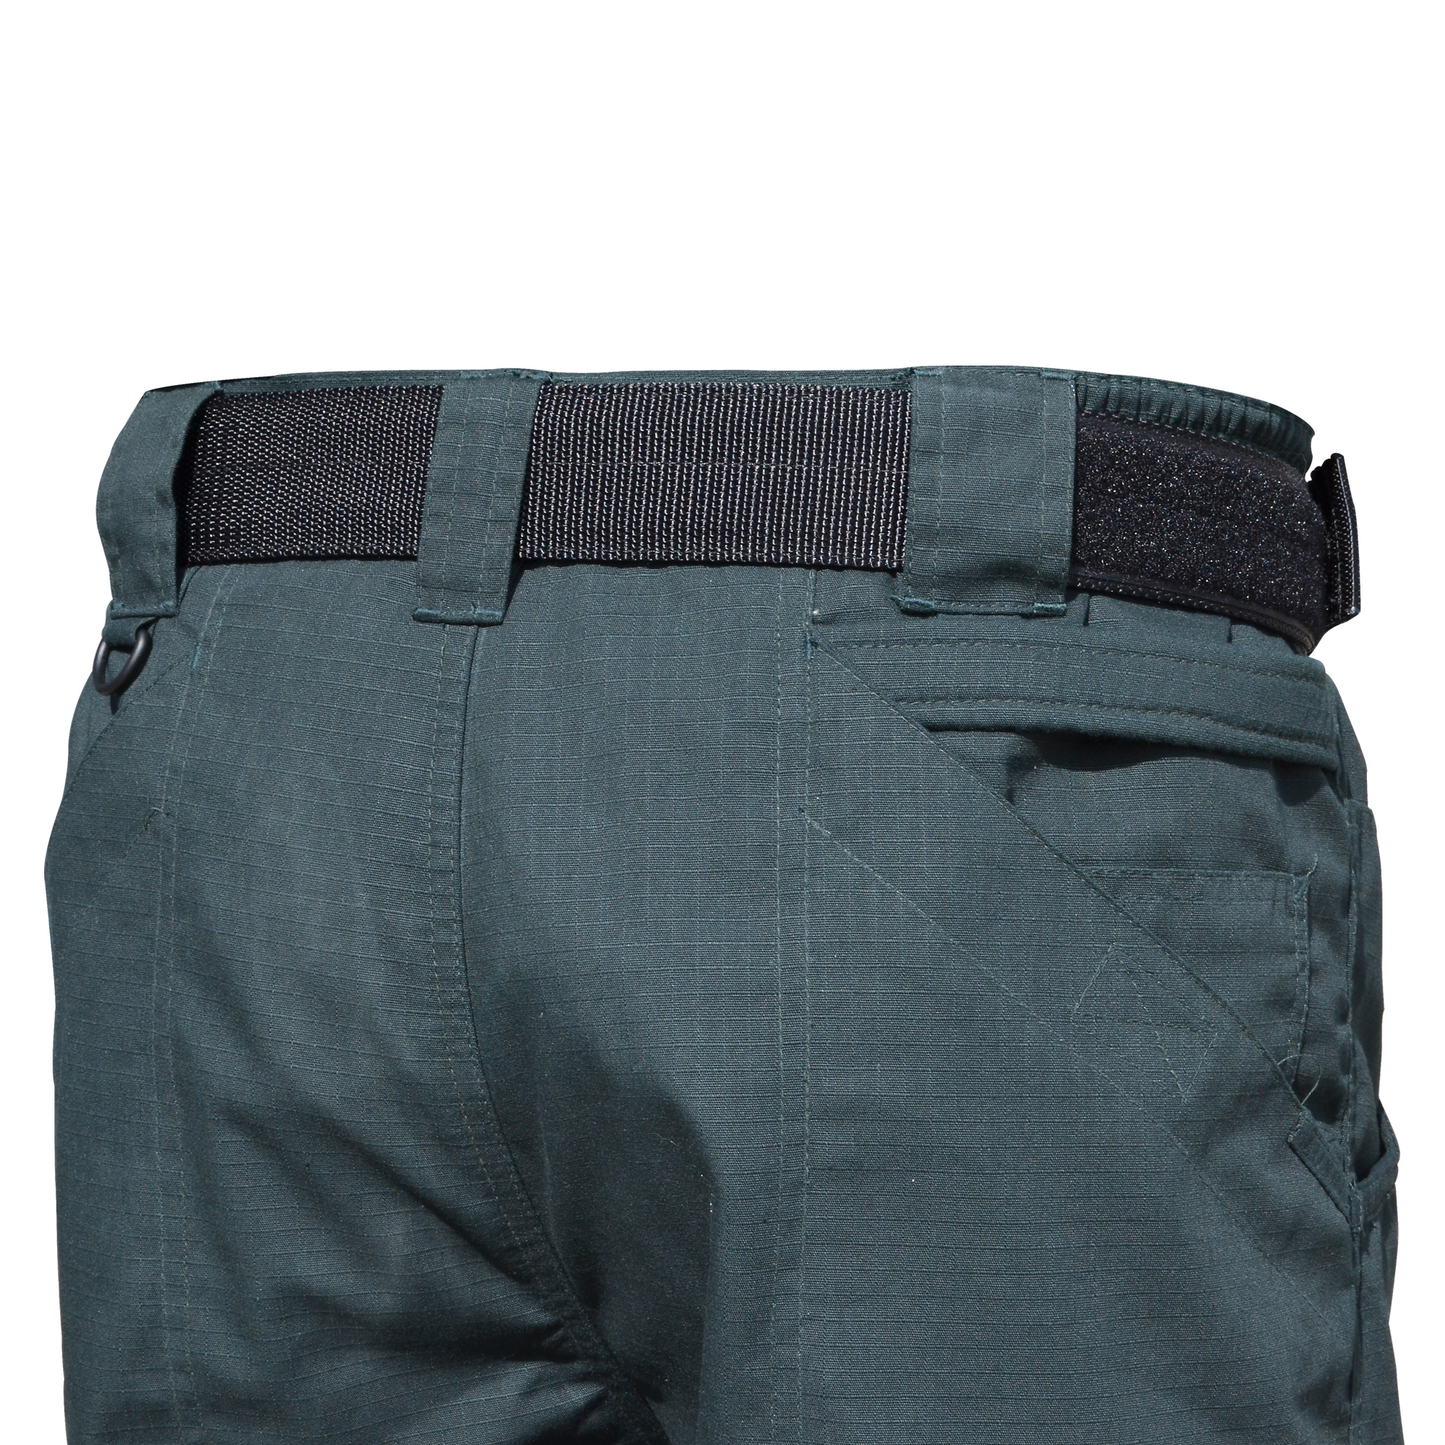 Niton Tactical RipStop EMS Trousers 32" Leg - Midnight Green